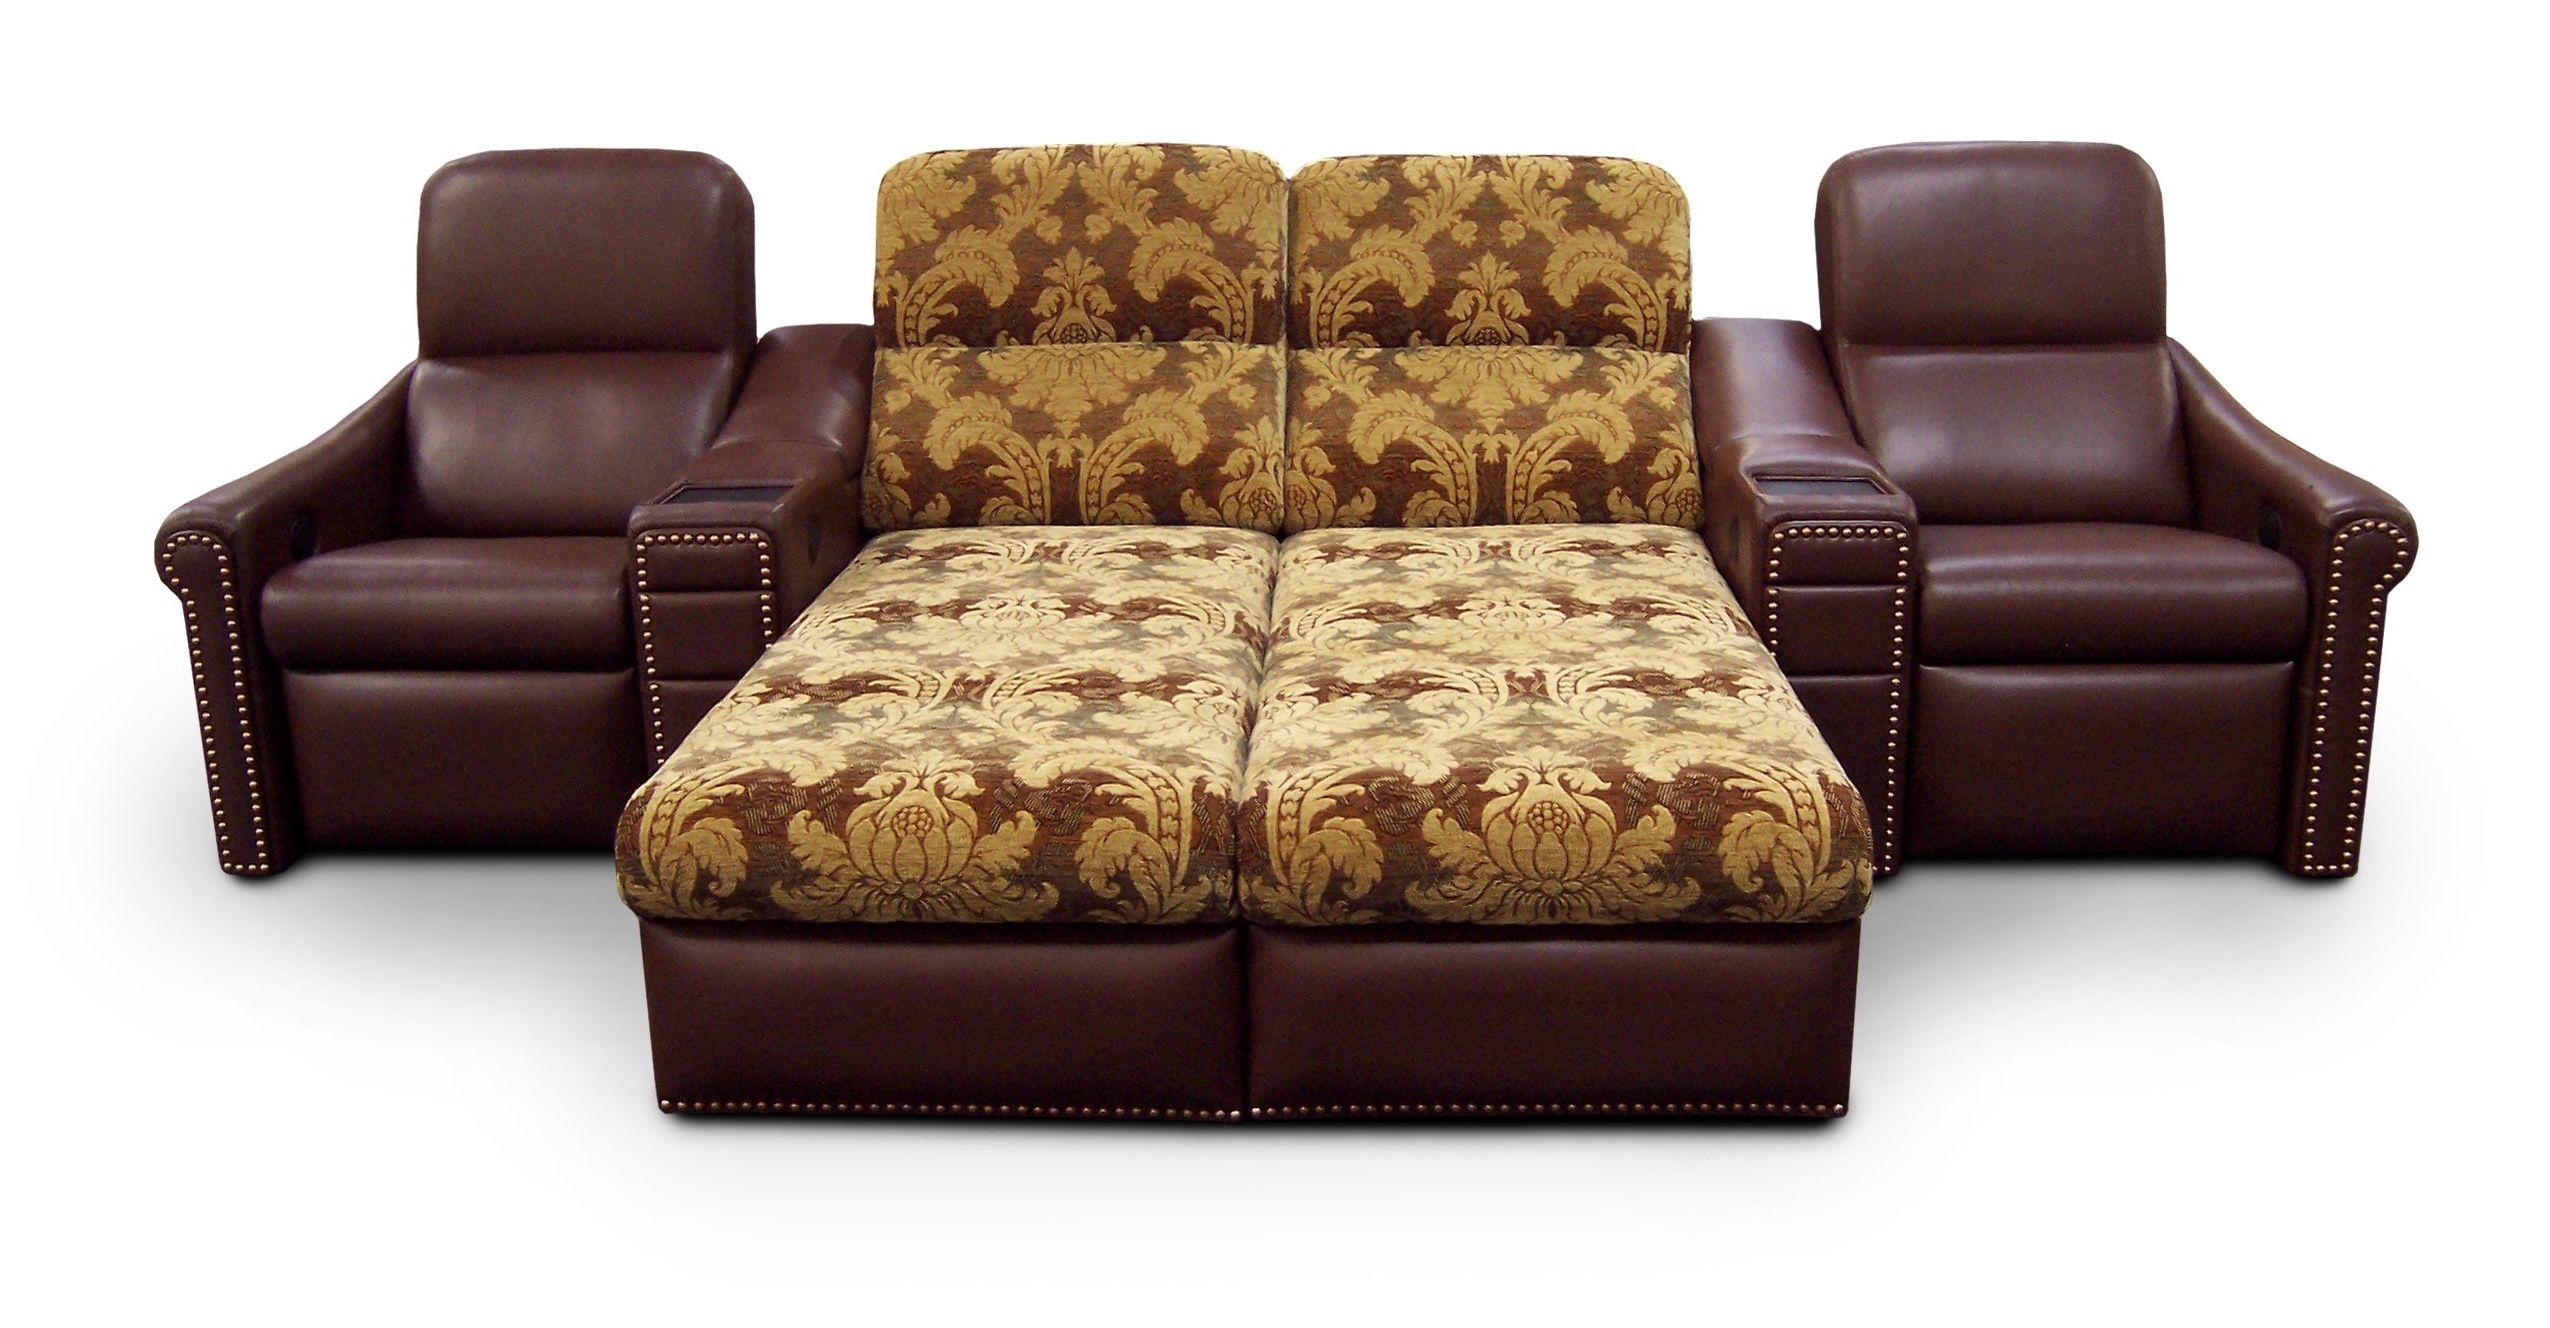 Trendy Double Chaise Lounge Sofa Decorators Systems – Surripui For Leather Lounge Sofas (View 13 of 20)